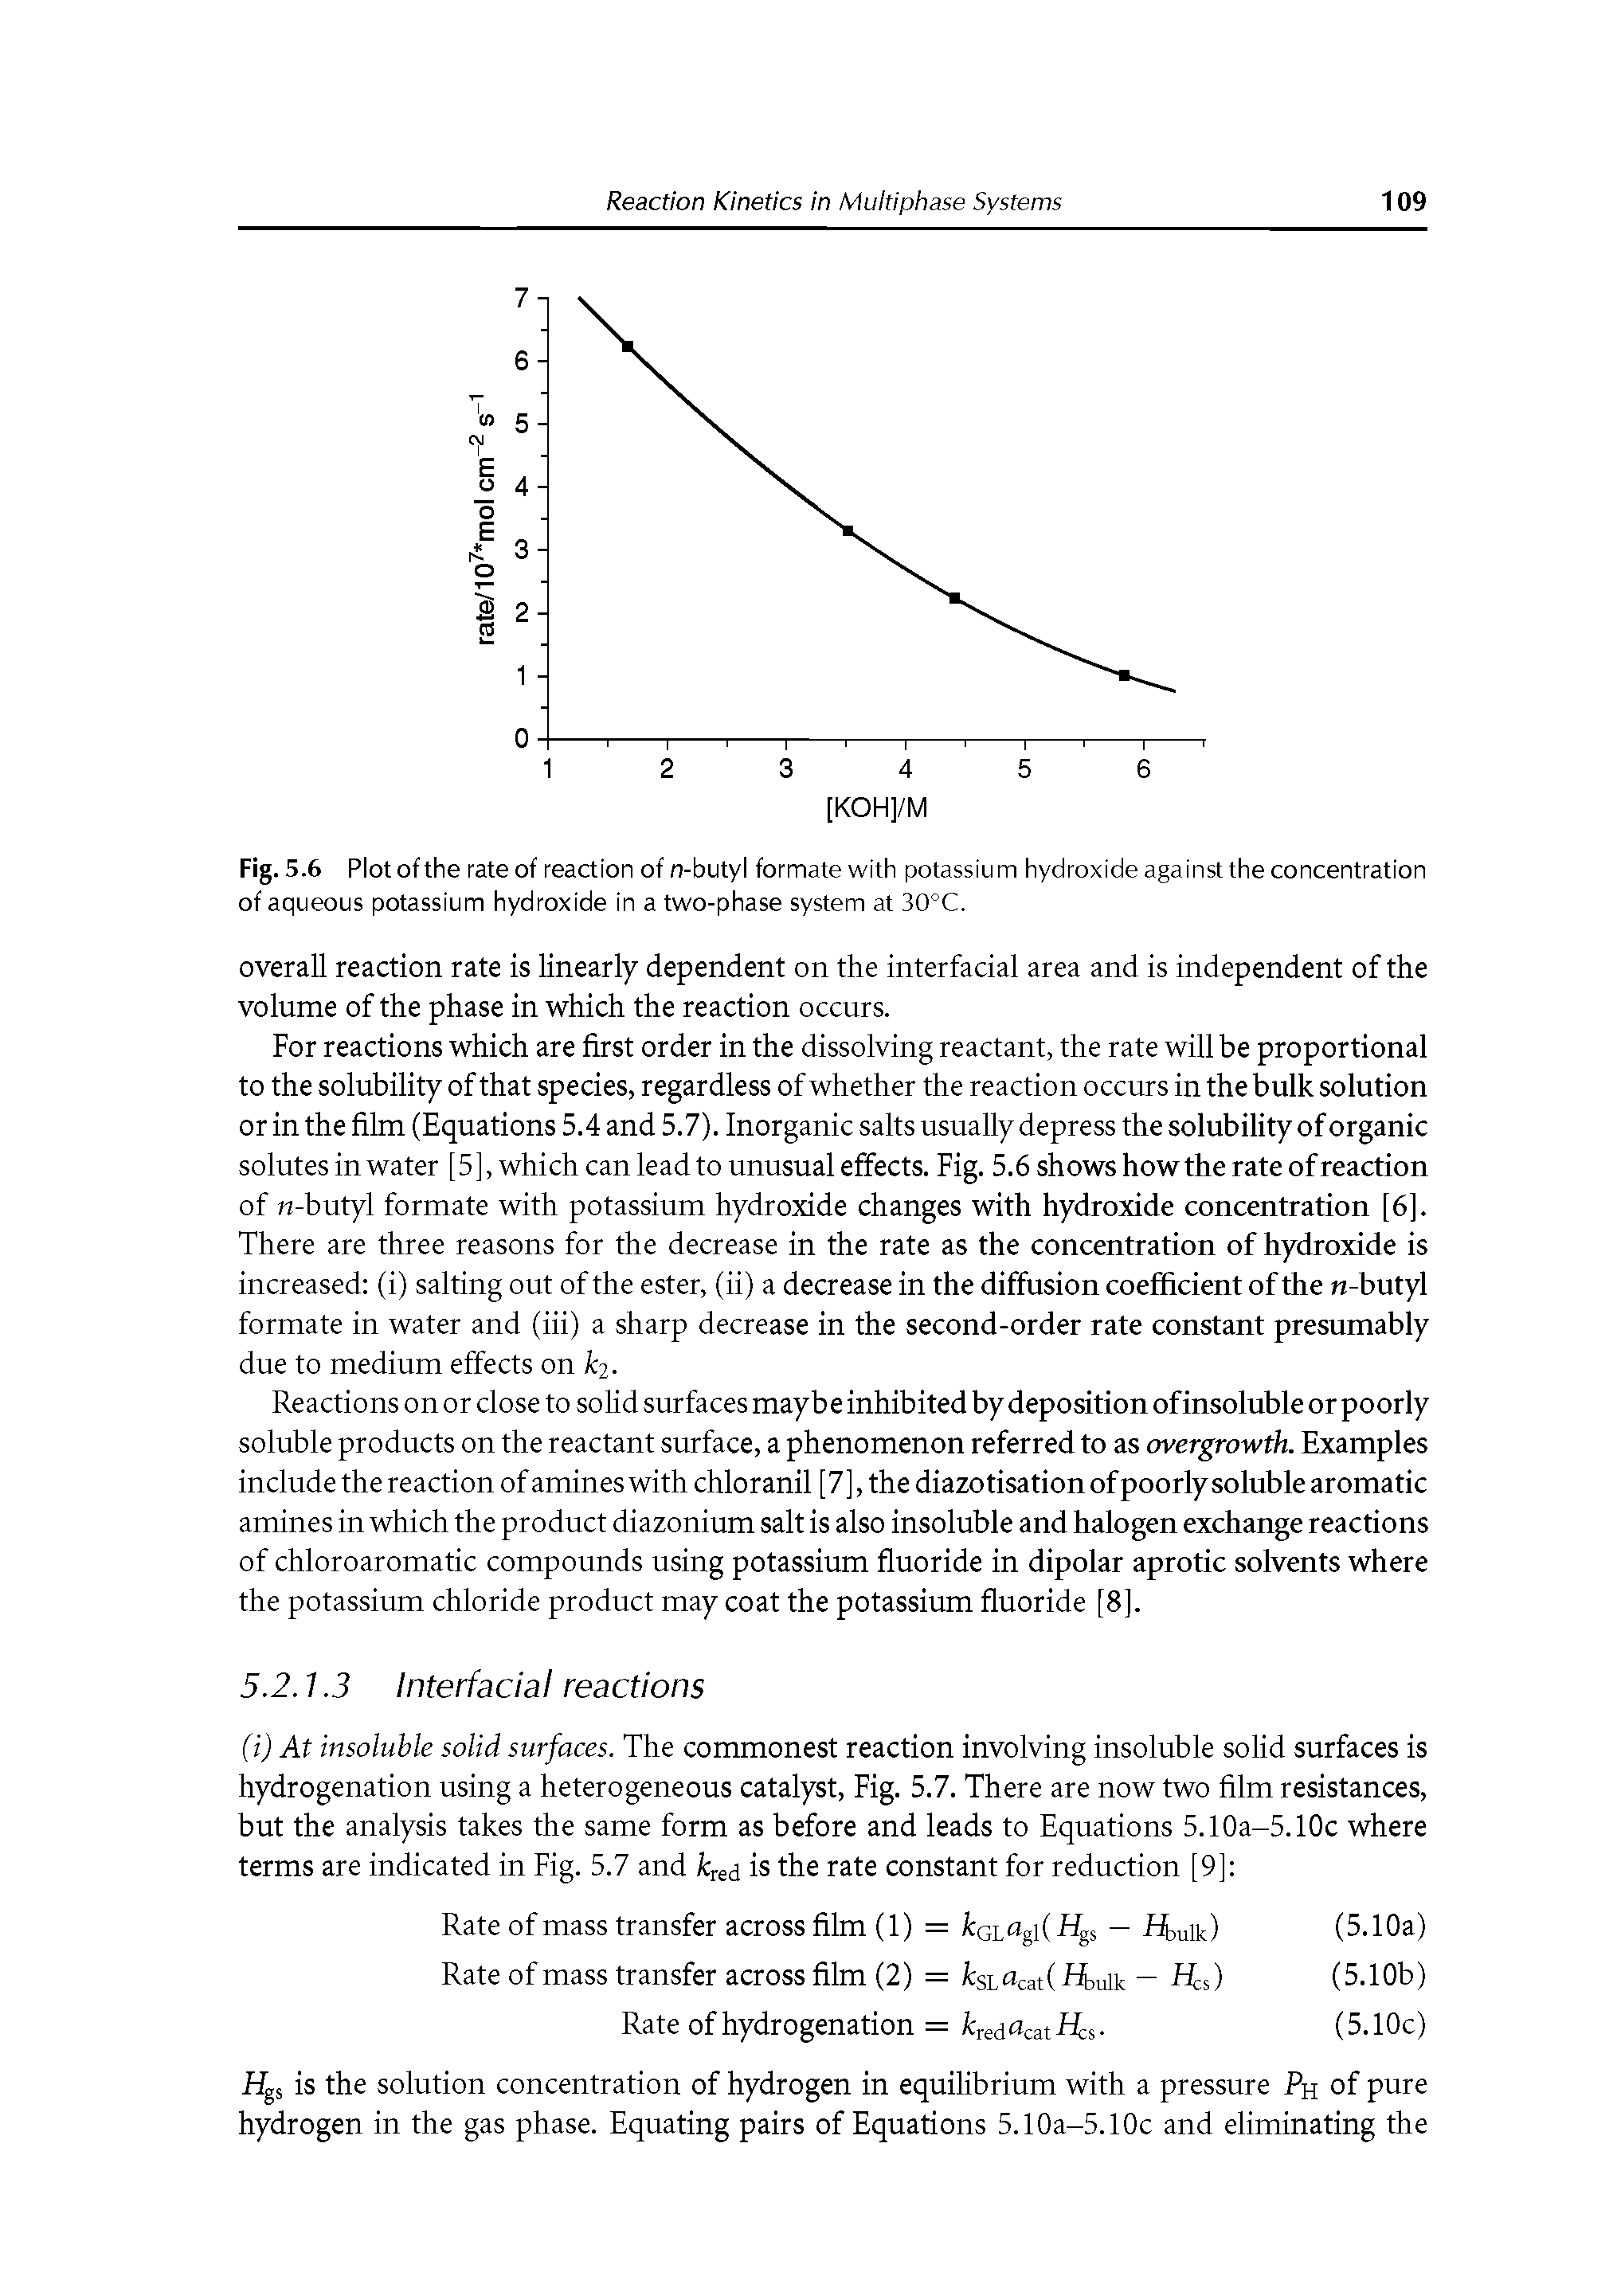 Fig.5.6 Plot of the rate of reaction of n-butyl formate with potassium hydroxide against the concentration of aqueous potassium hydroxide in a two-phase system at 30°C.